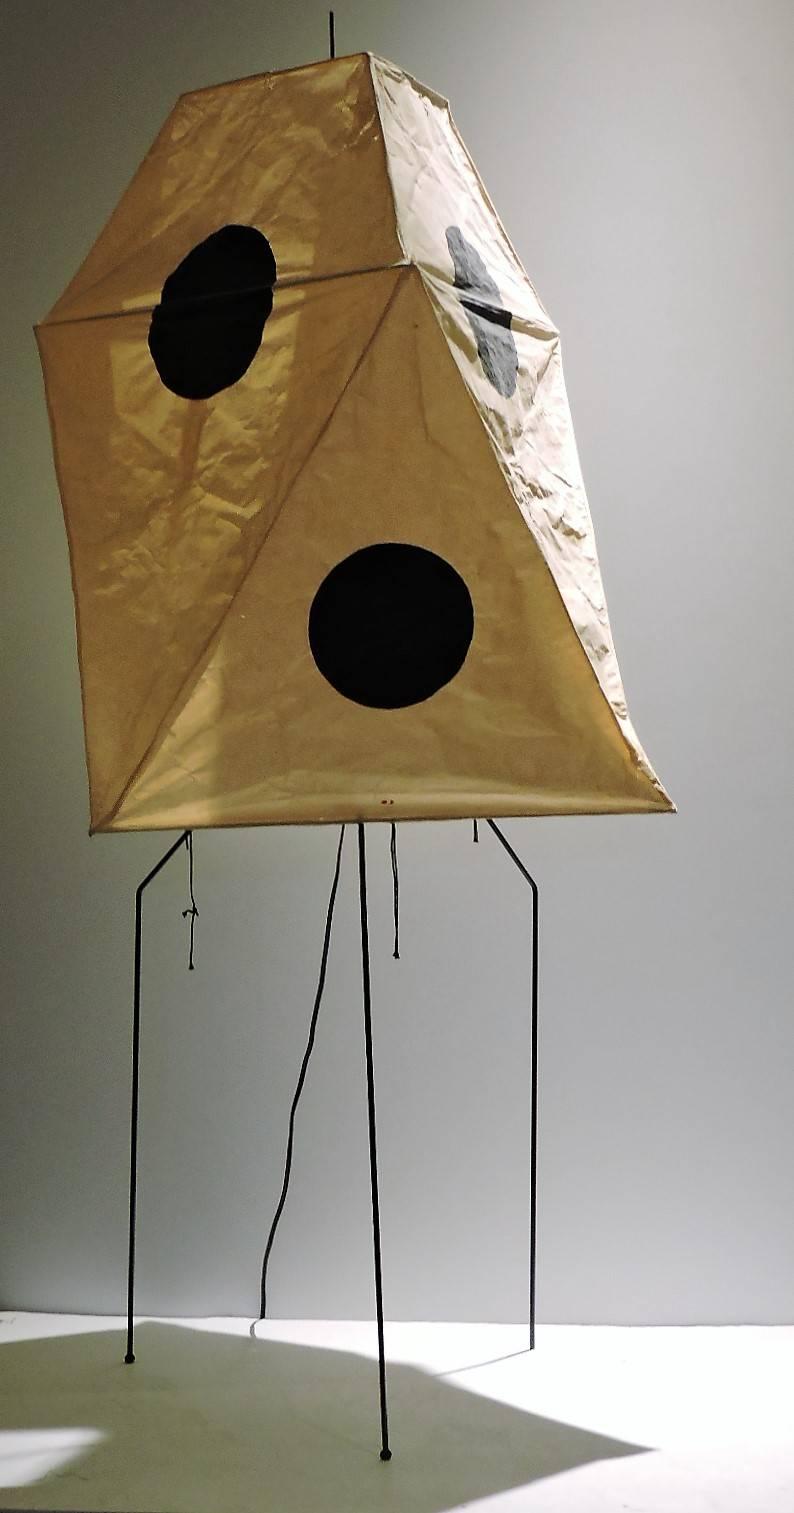   Isamu Noguchi - Akari - Ozeki Japan - floor lamp light sculpture - UF3-Q - signed with red sun half moon mark & Japan ( see picture 6 ) in all original vintage condition with tears to washi paper - which have been stabilized on interior with self